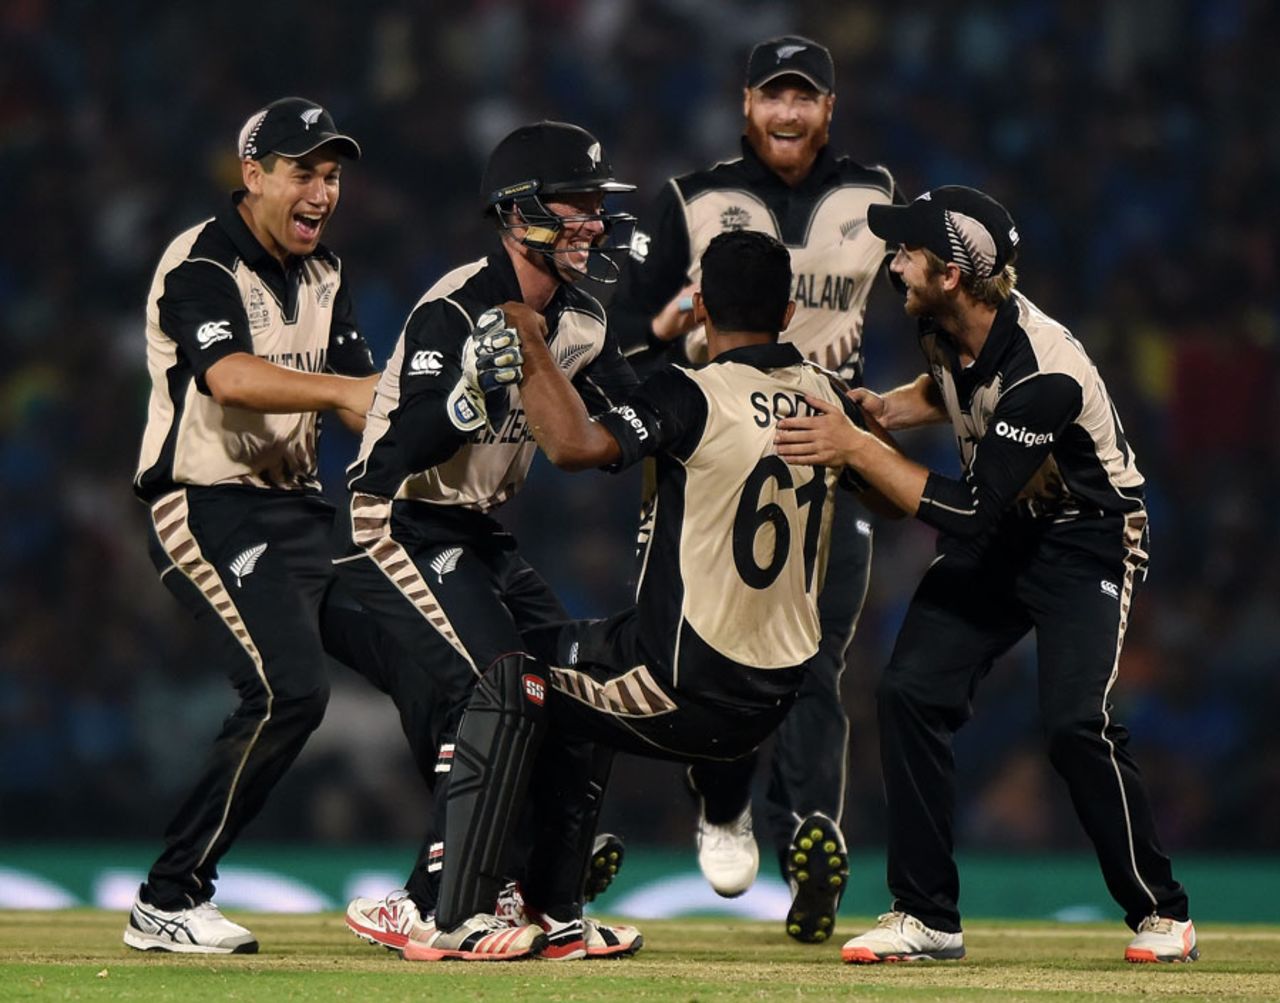 New Zealand players celebrate a wicket with Ish Sodhi, India v New Zealand, World T20 2016, Group 2, Nagpur, March 15, 2016 